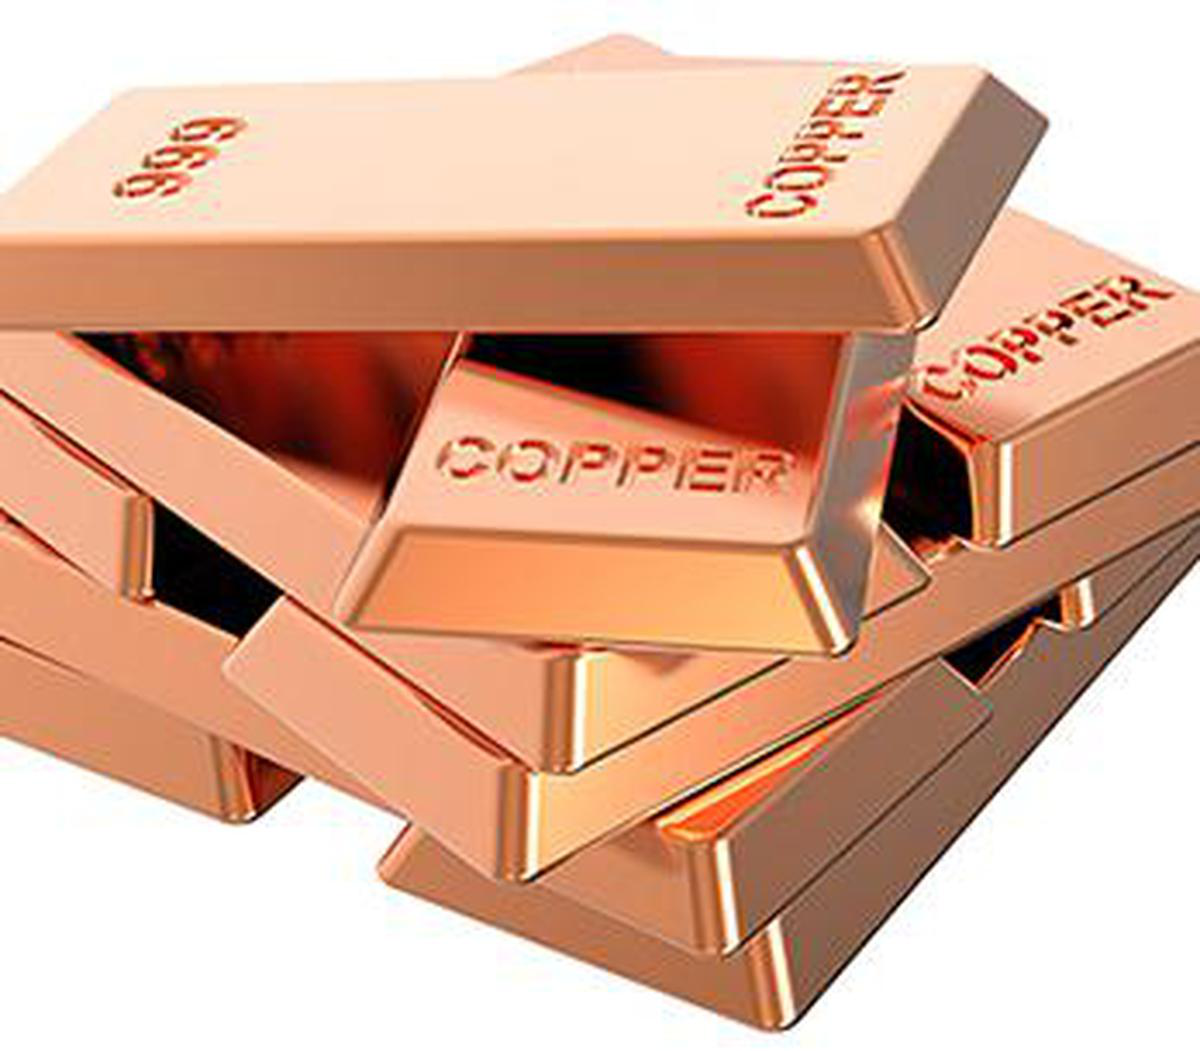 Copper prices likely to rule lower for rest of this year